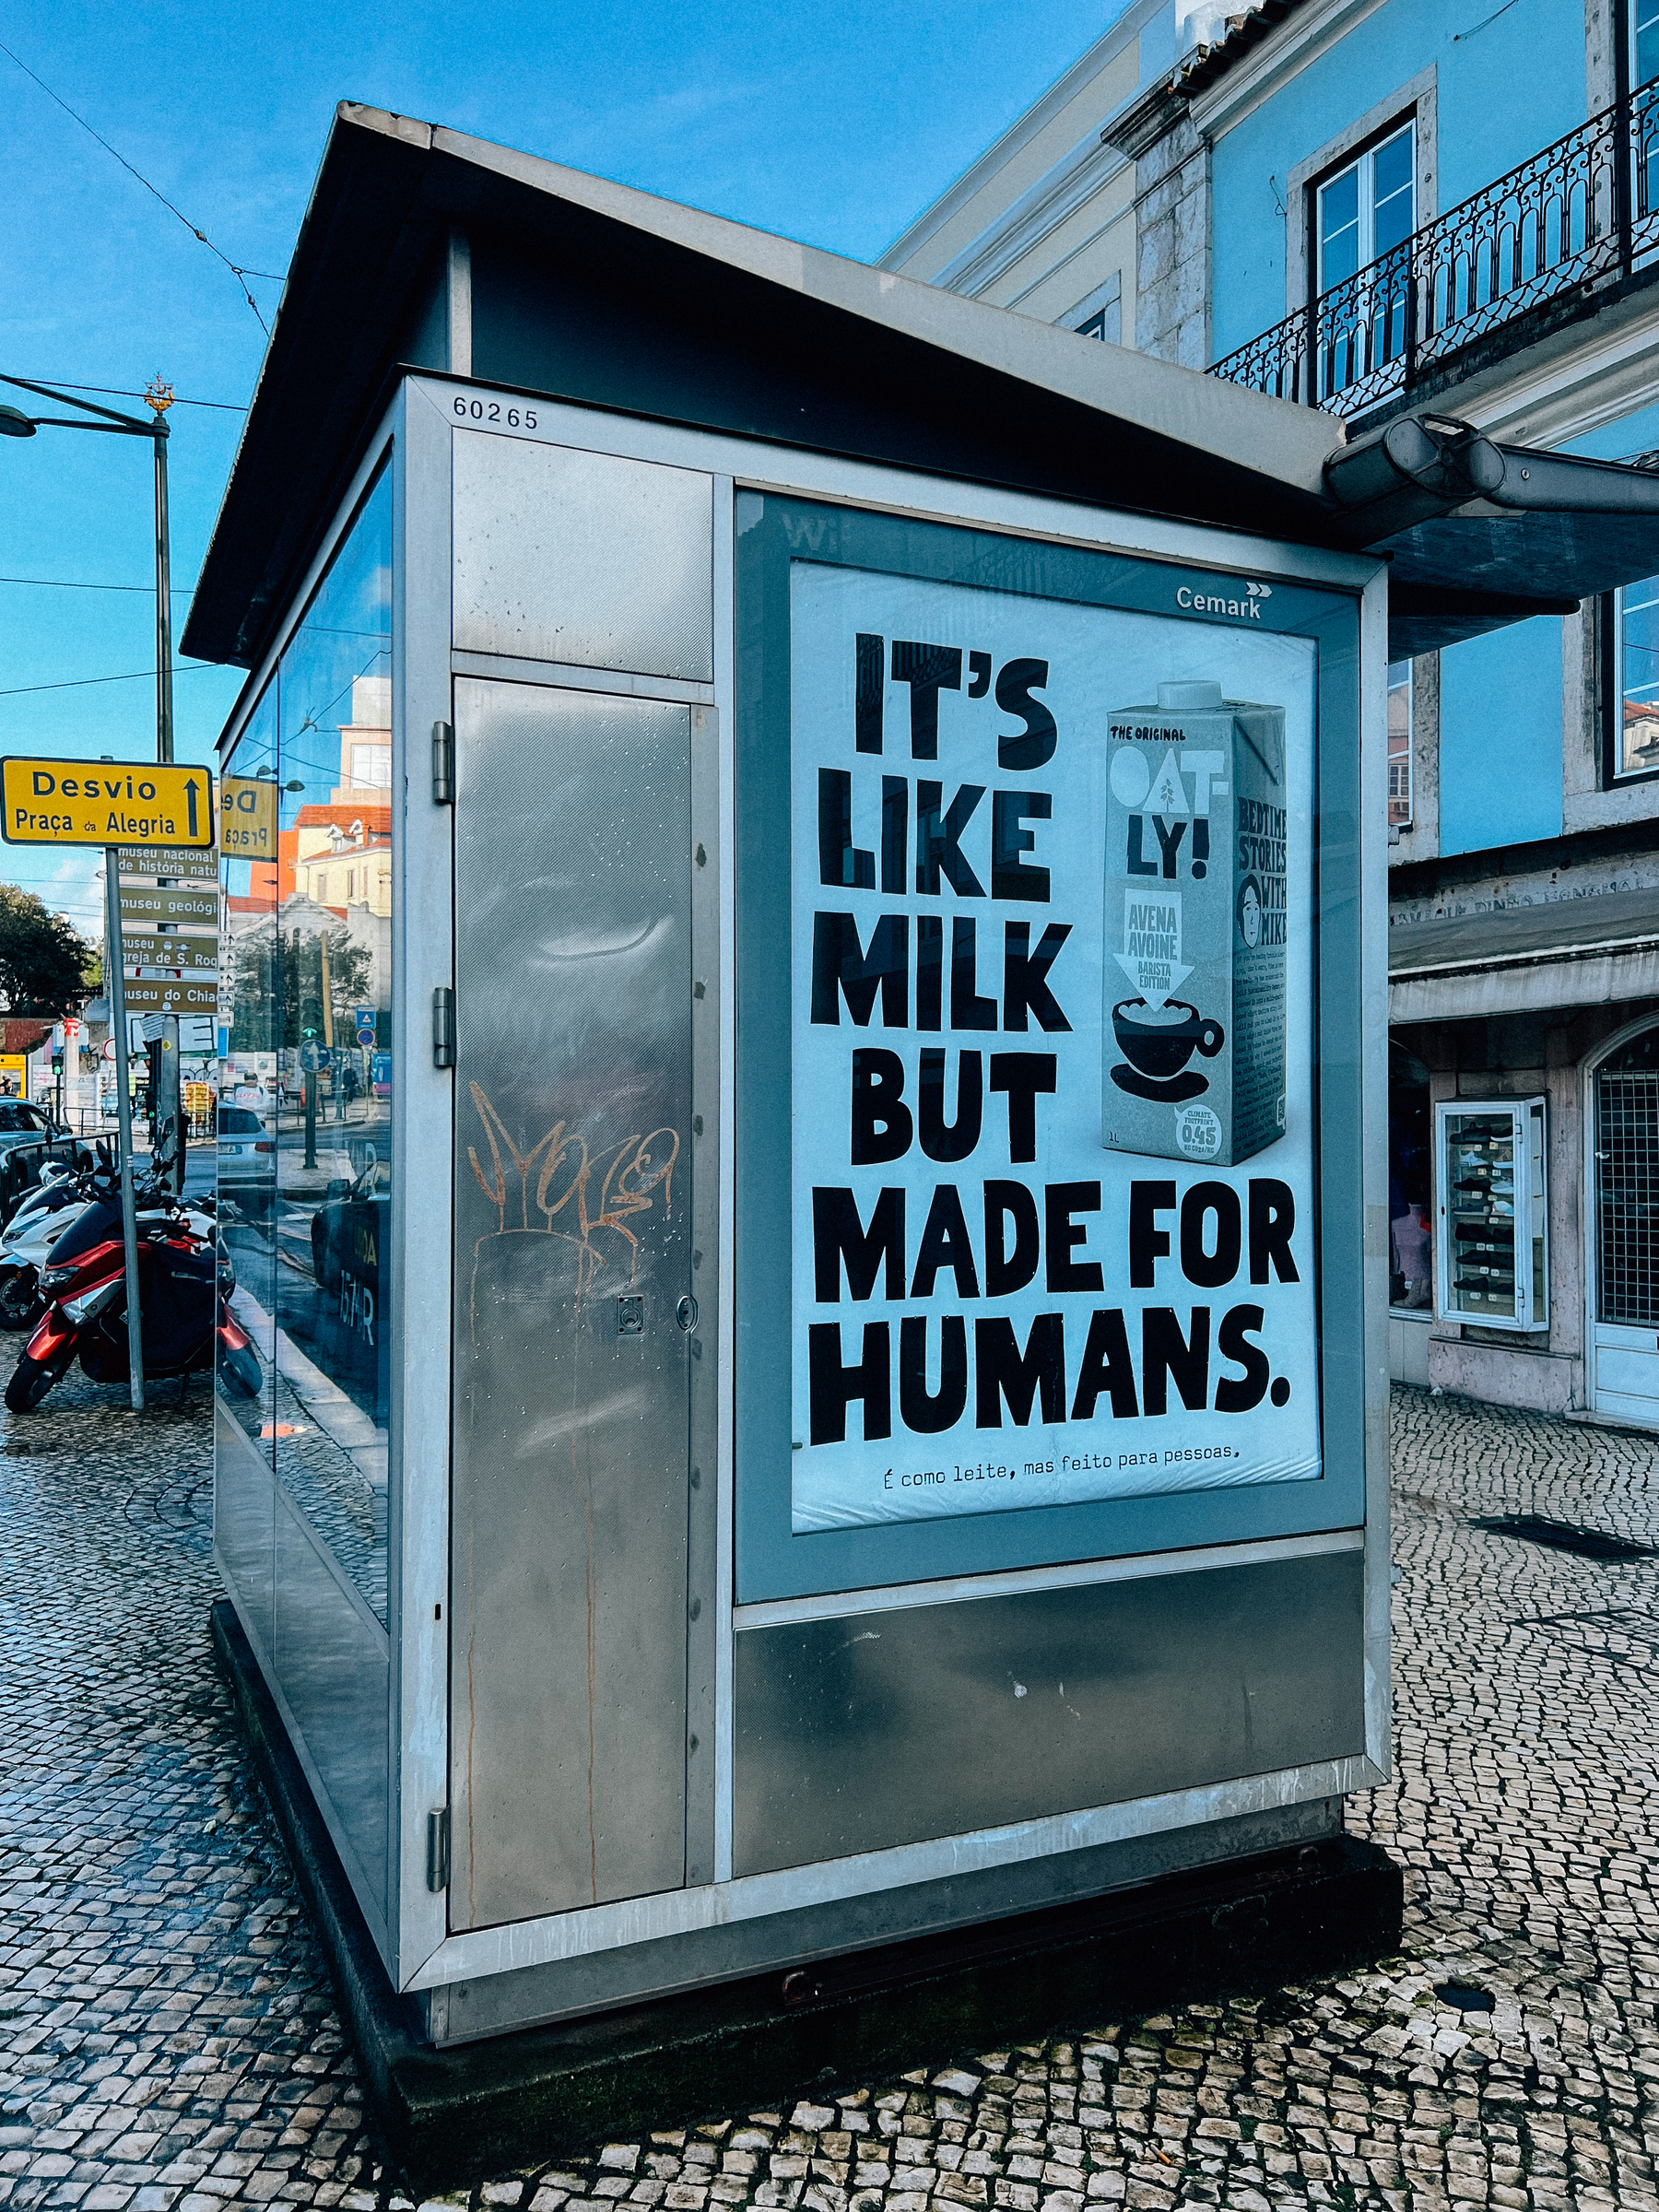 A kiosk featuring an advertisement for Oatly, a brand of oat milk, with the slogan &ldquo;It&rsquo;s like milk but made for humans.&rdquo; The shelter has graffiti on its side and is situated on a city street with cobblestones.